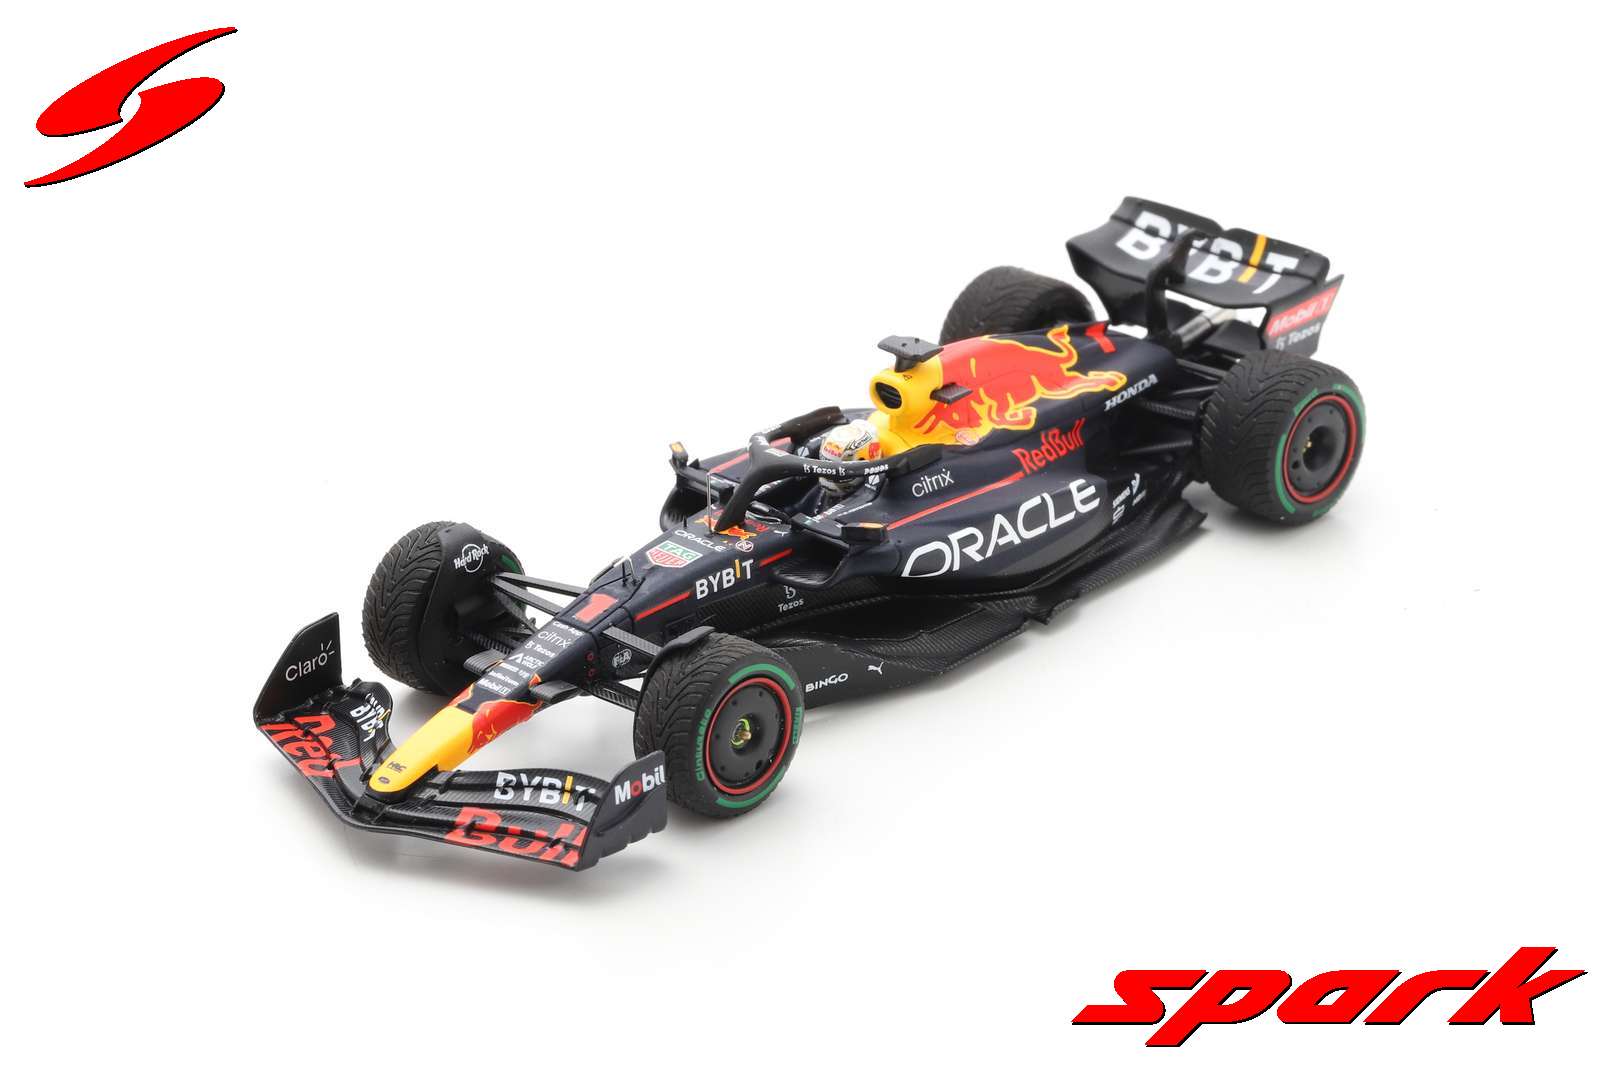 ORACLE RED BULL RACING RB18 NO.1 ORACLE RED BULL RACING WINNER JAPANESE GP 2022 2022 FORMULA ONE DRIVERS' CHAMPION MAX VERSTAPPEN WITH NO.1 AND WORLD CHAMPION BOARD /Spark S8551 1:43/